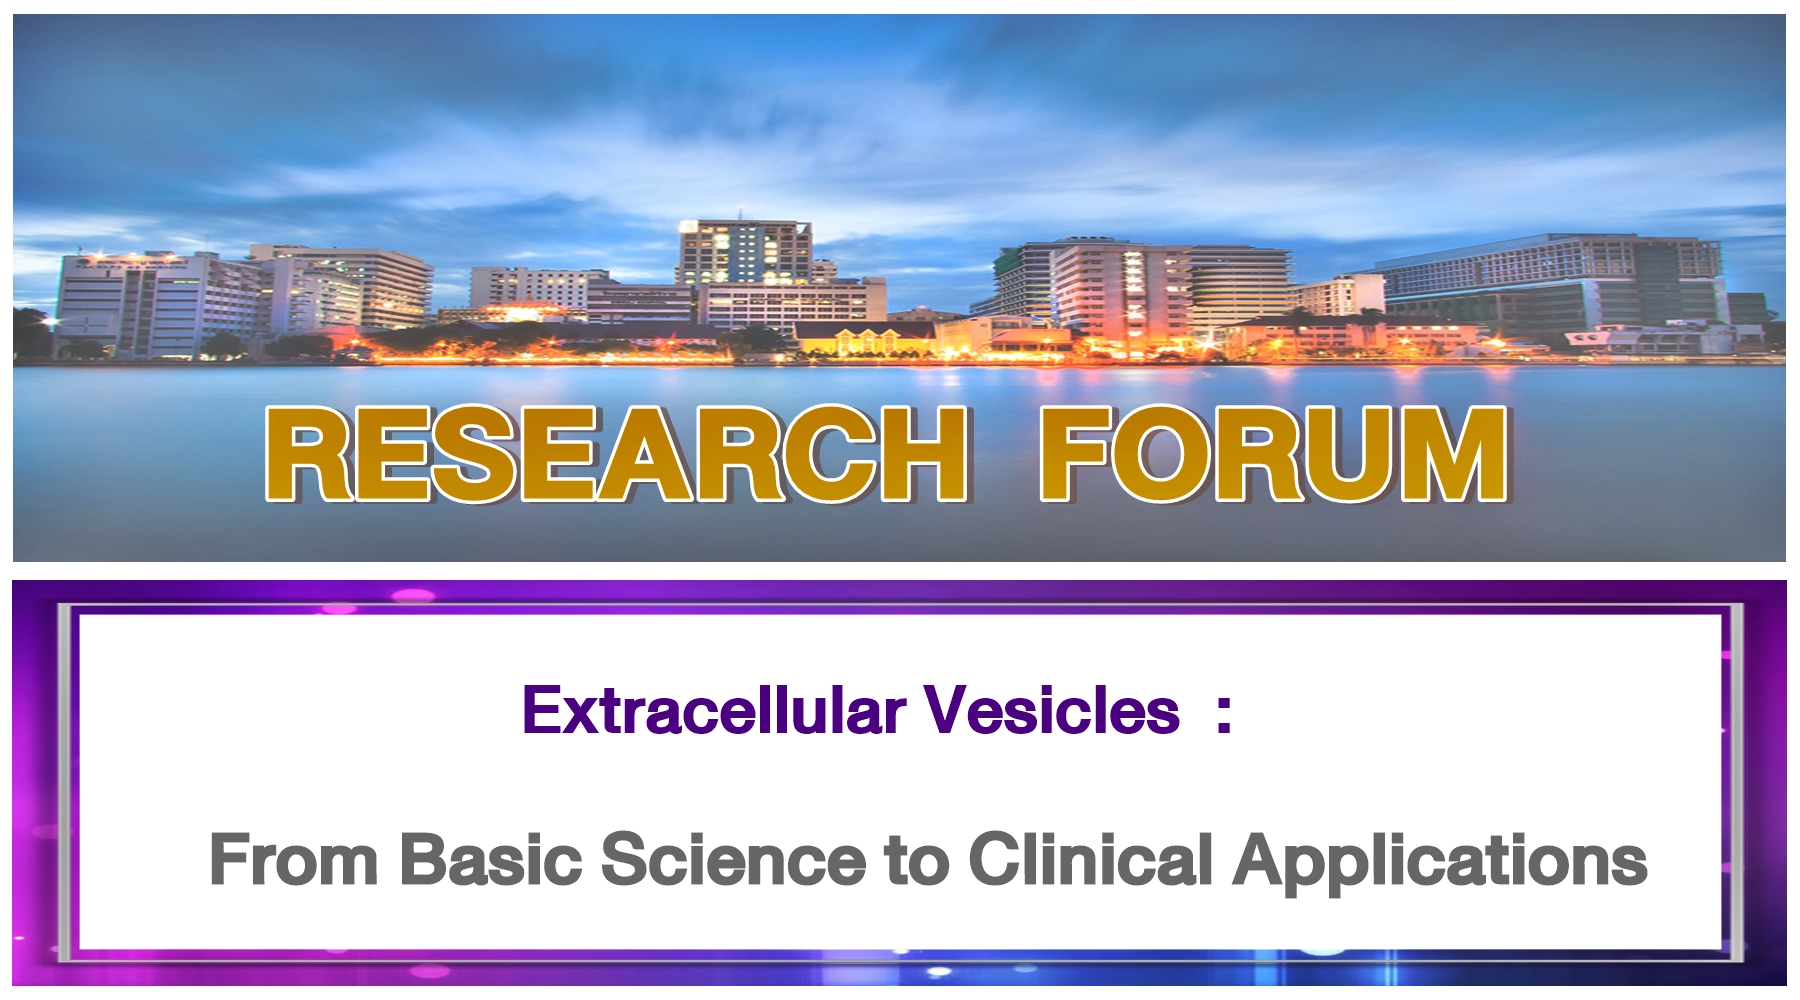 Extracellular Vesicles: from Basic Science to Clinical Applications